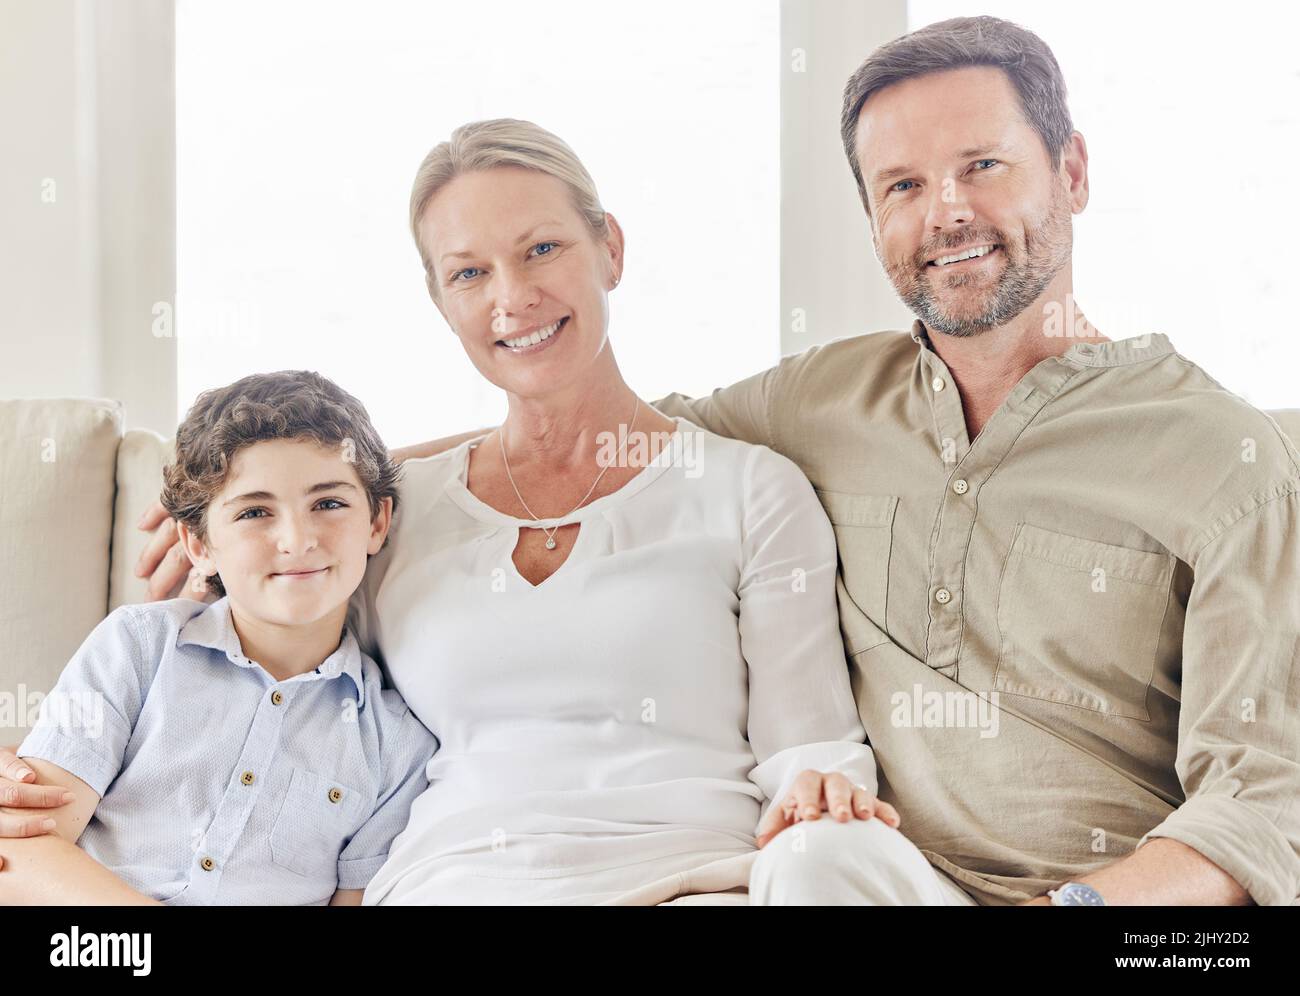 Happy with our little family. a young couple bonding with their son on the sofa at home. Stock Photo